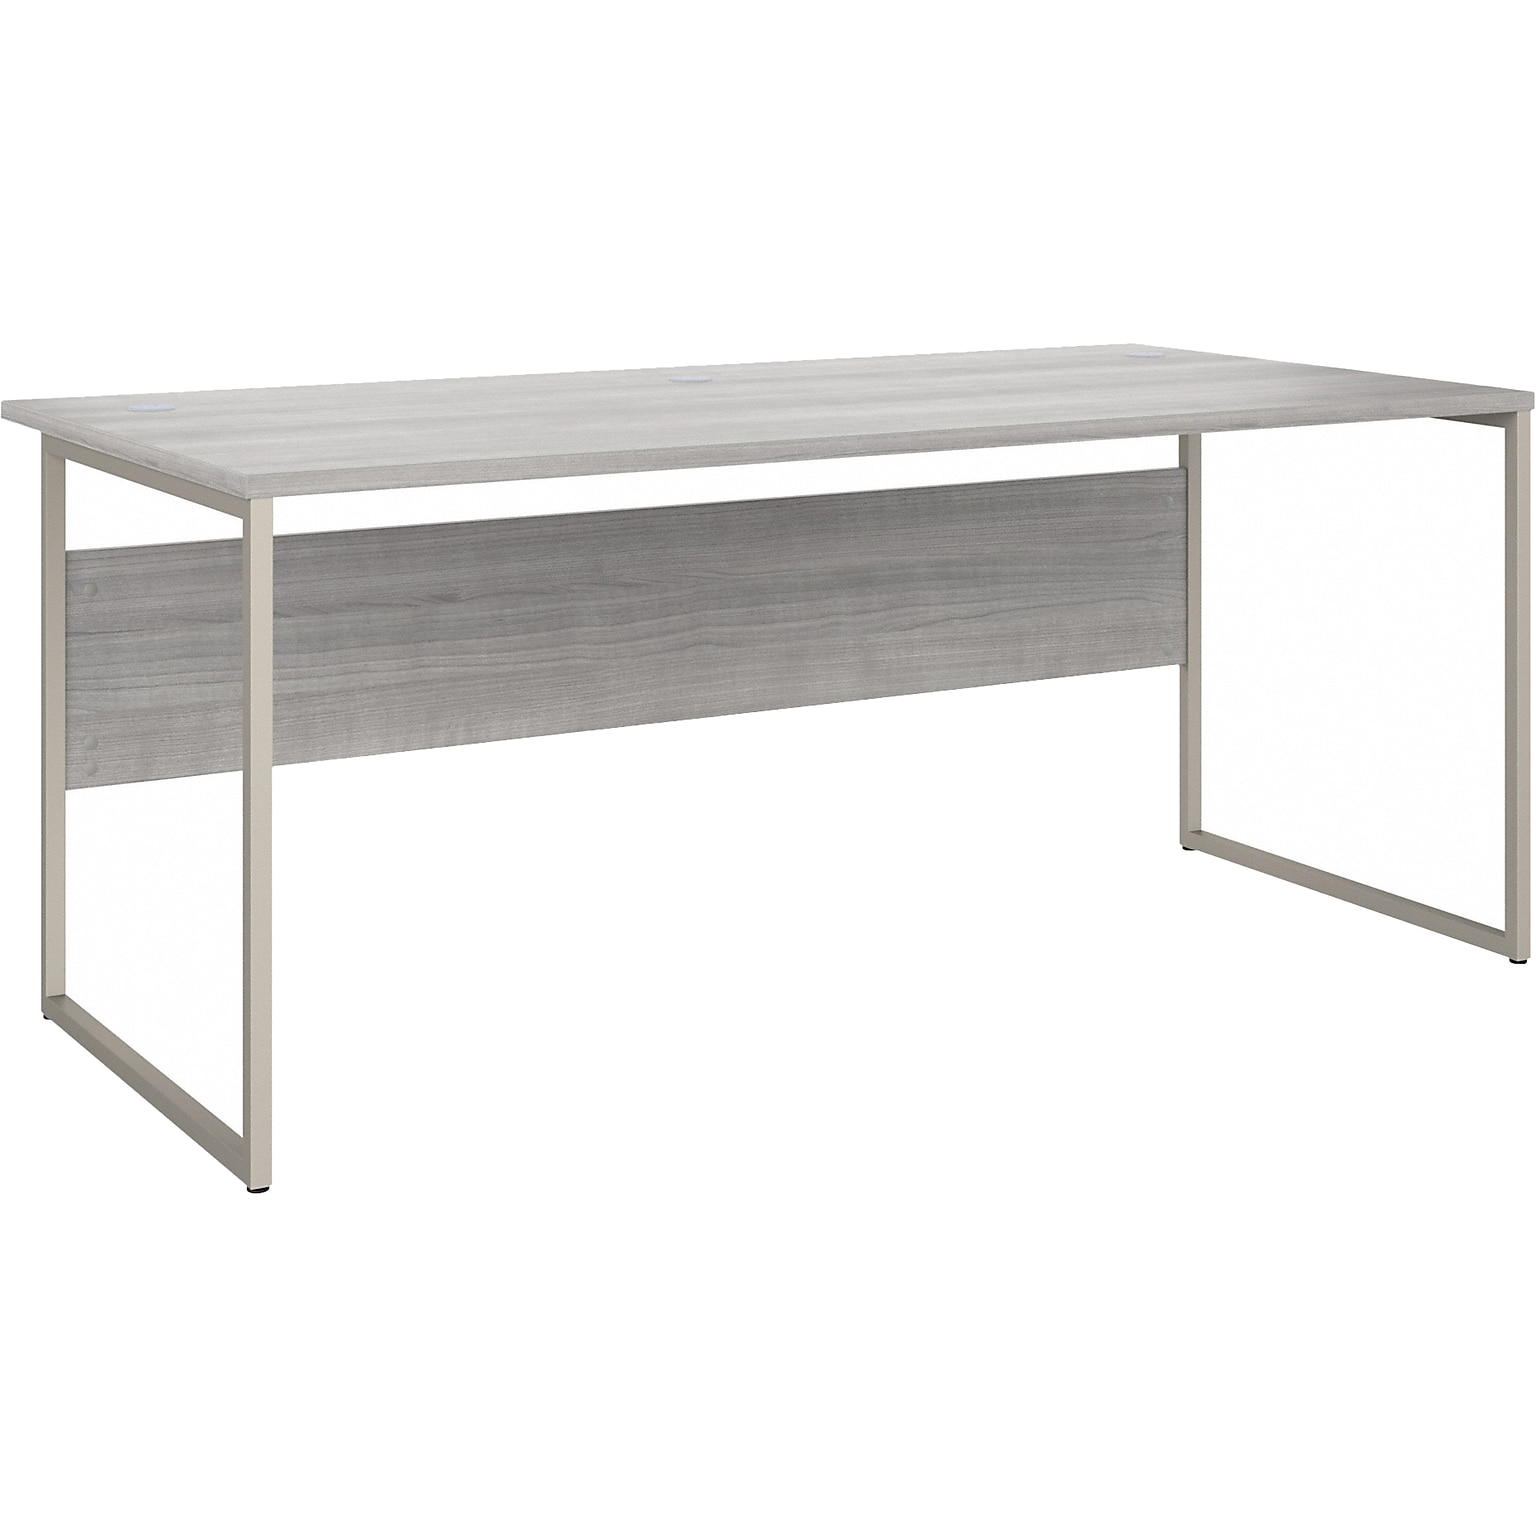 Bush Business Furniture Hybrid 72W x 36D Computer Table Desk with Metal Legs, Platinum Gray (HYD172PG)